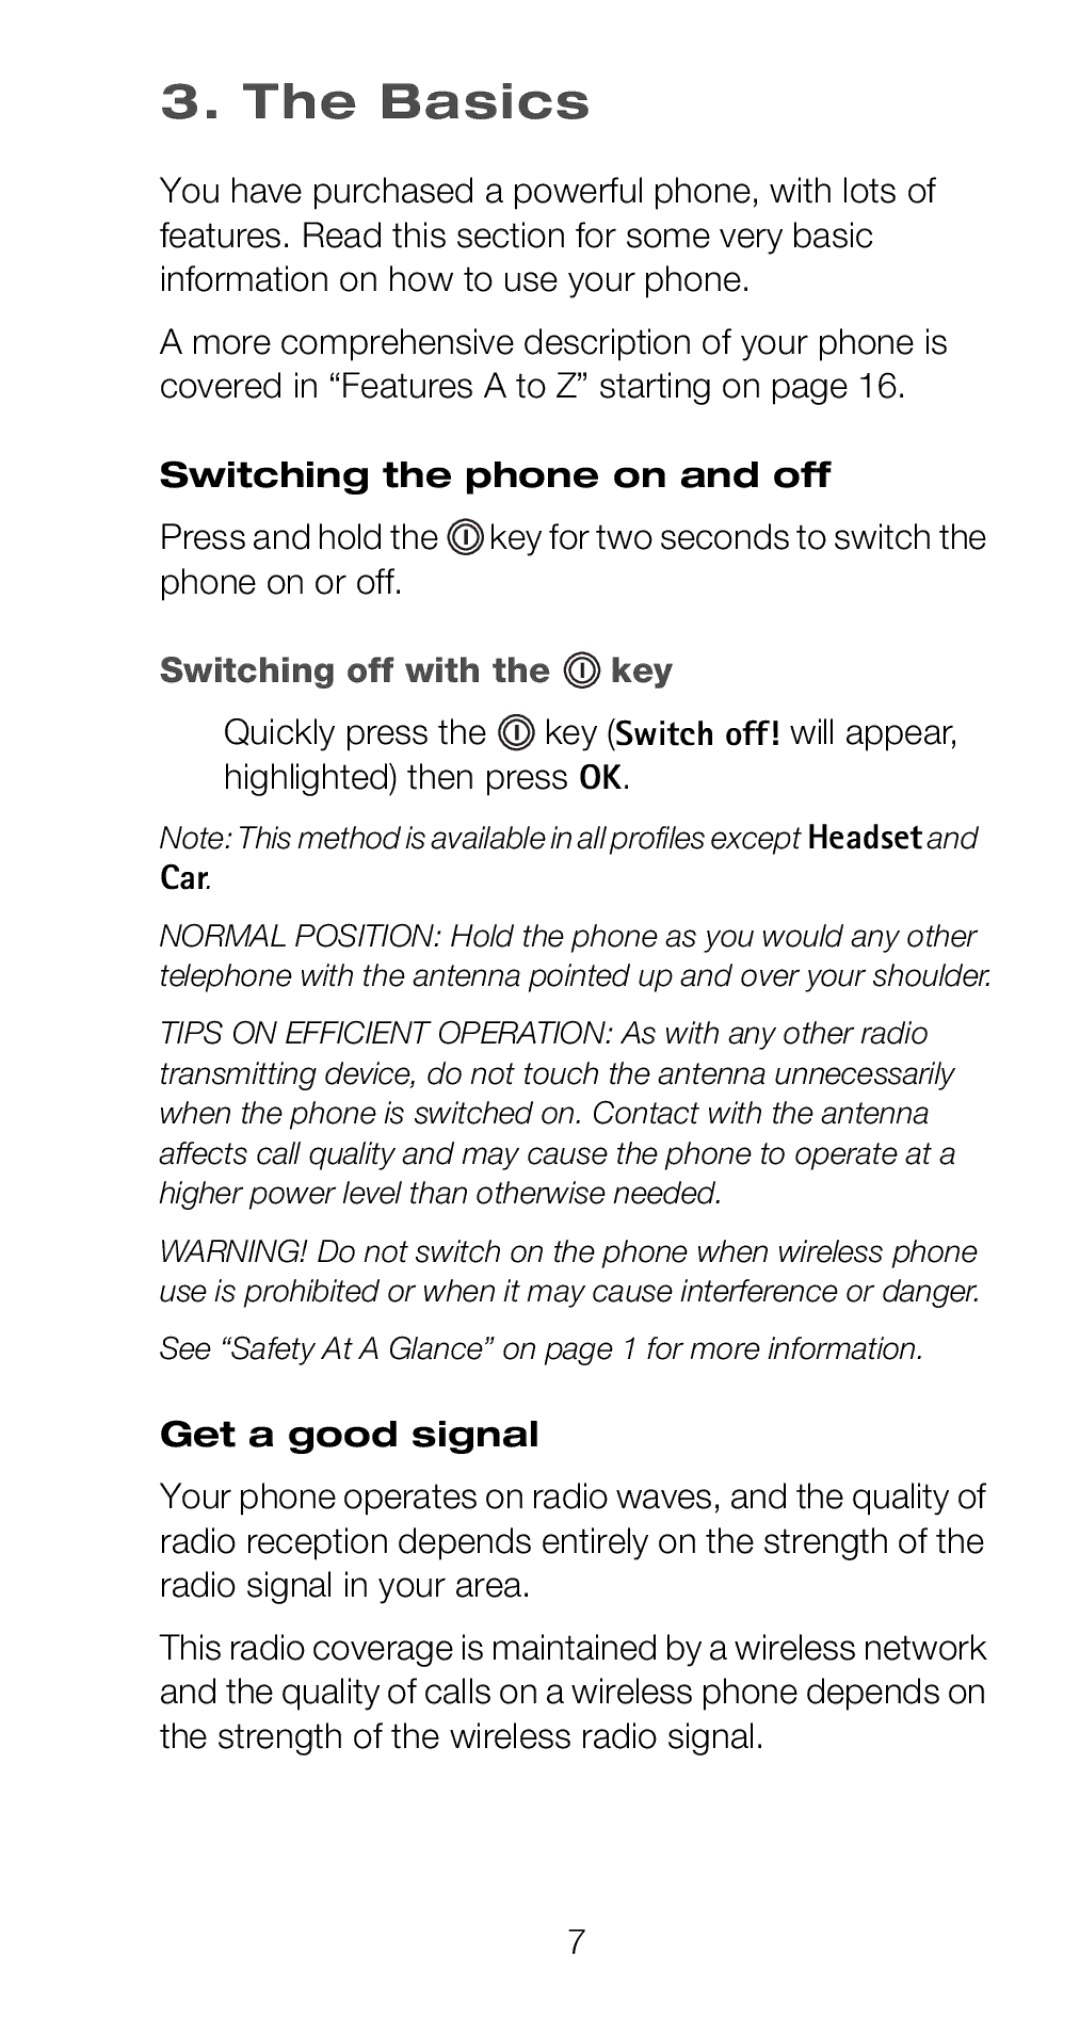 Nokia 6160 manual Basics, Switching the phone on and off, Switching off with the key, Car, Get a good signal 